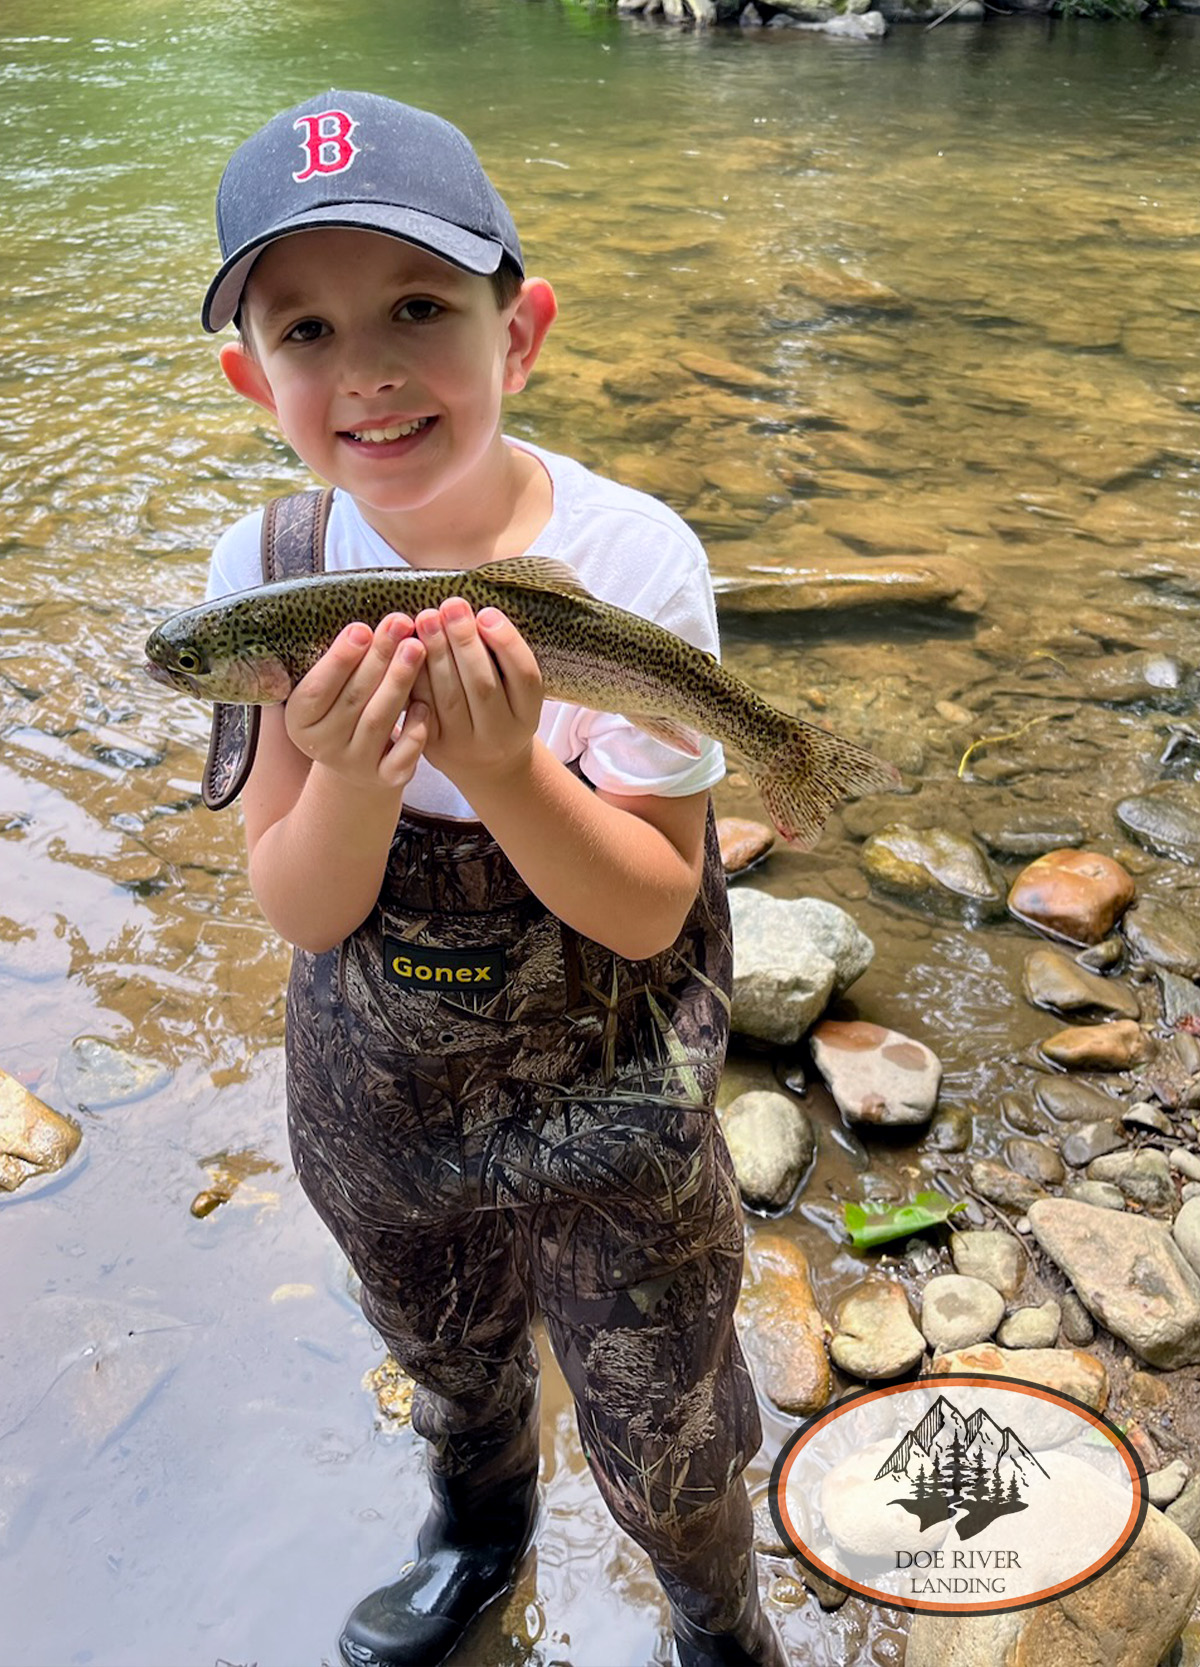 Doe River Landing campground in Roan Mountain, TN. Best vacation rental near Elizabethton, TN and Johnson City TN. Relax riverside and enjoy trout fishing, swimming, hiking, tubing, the playground, and more.